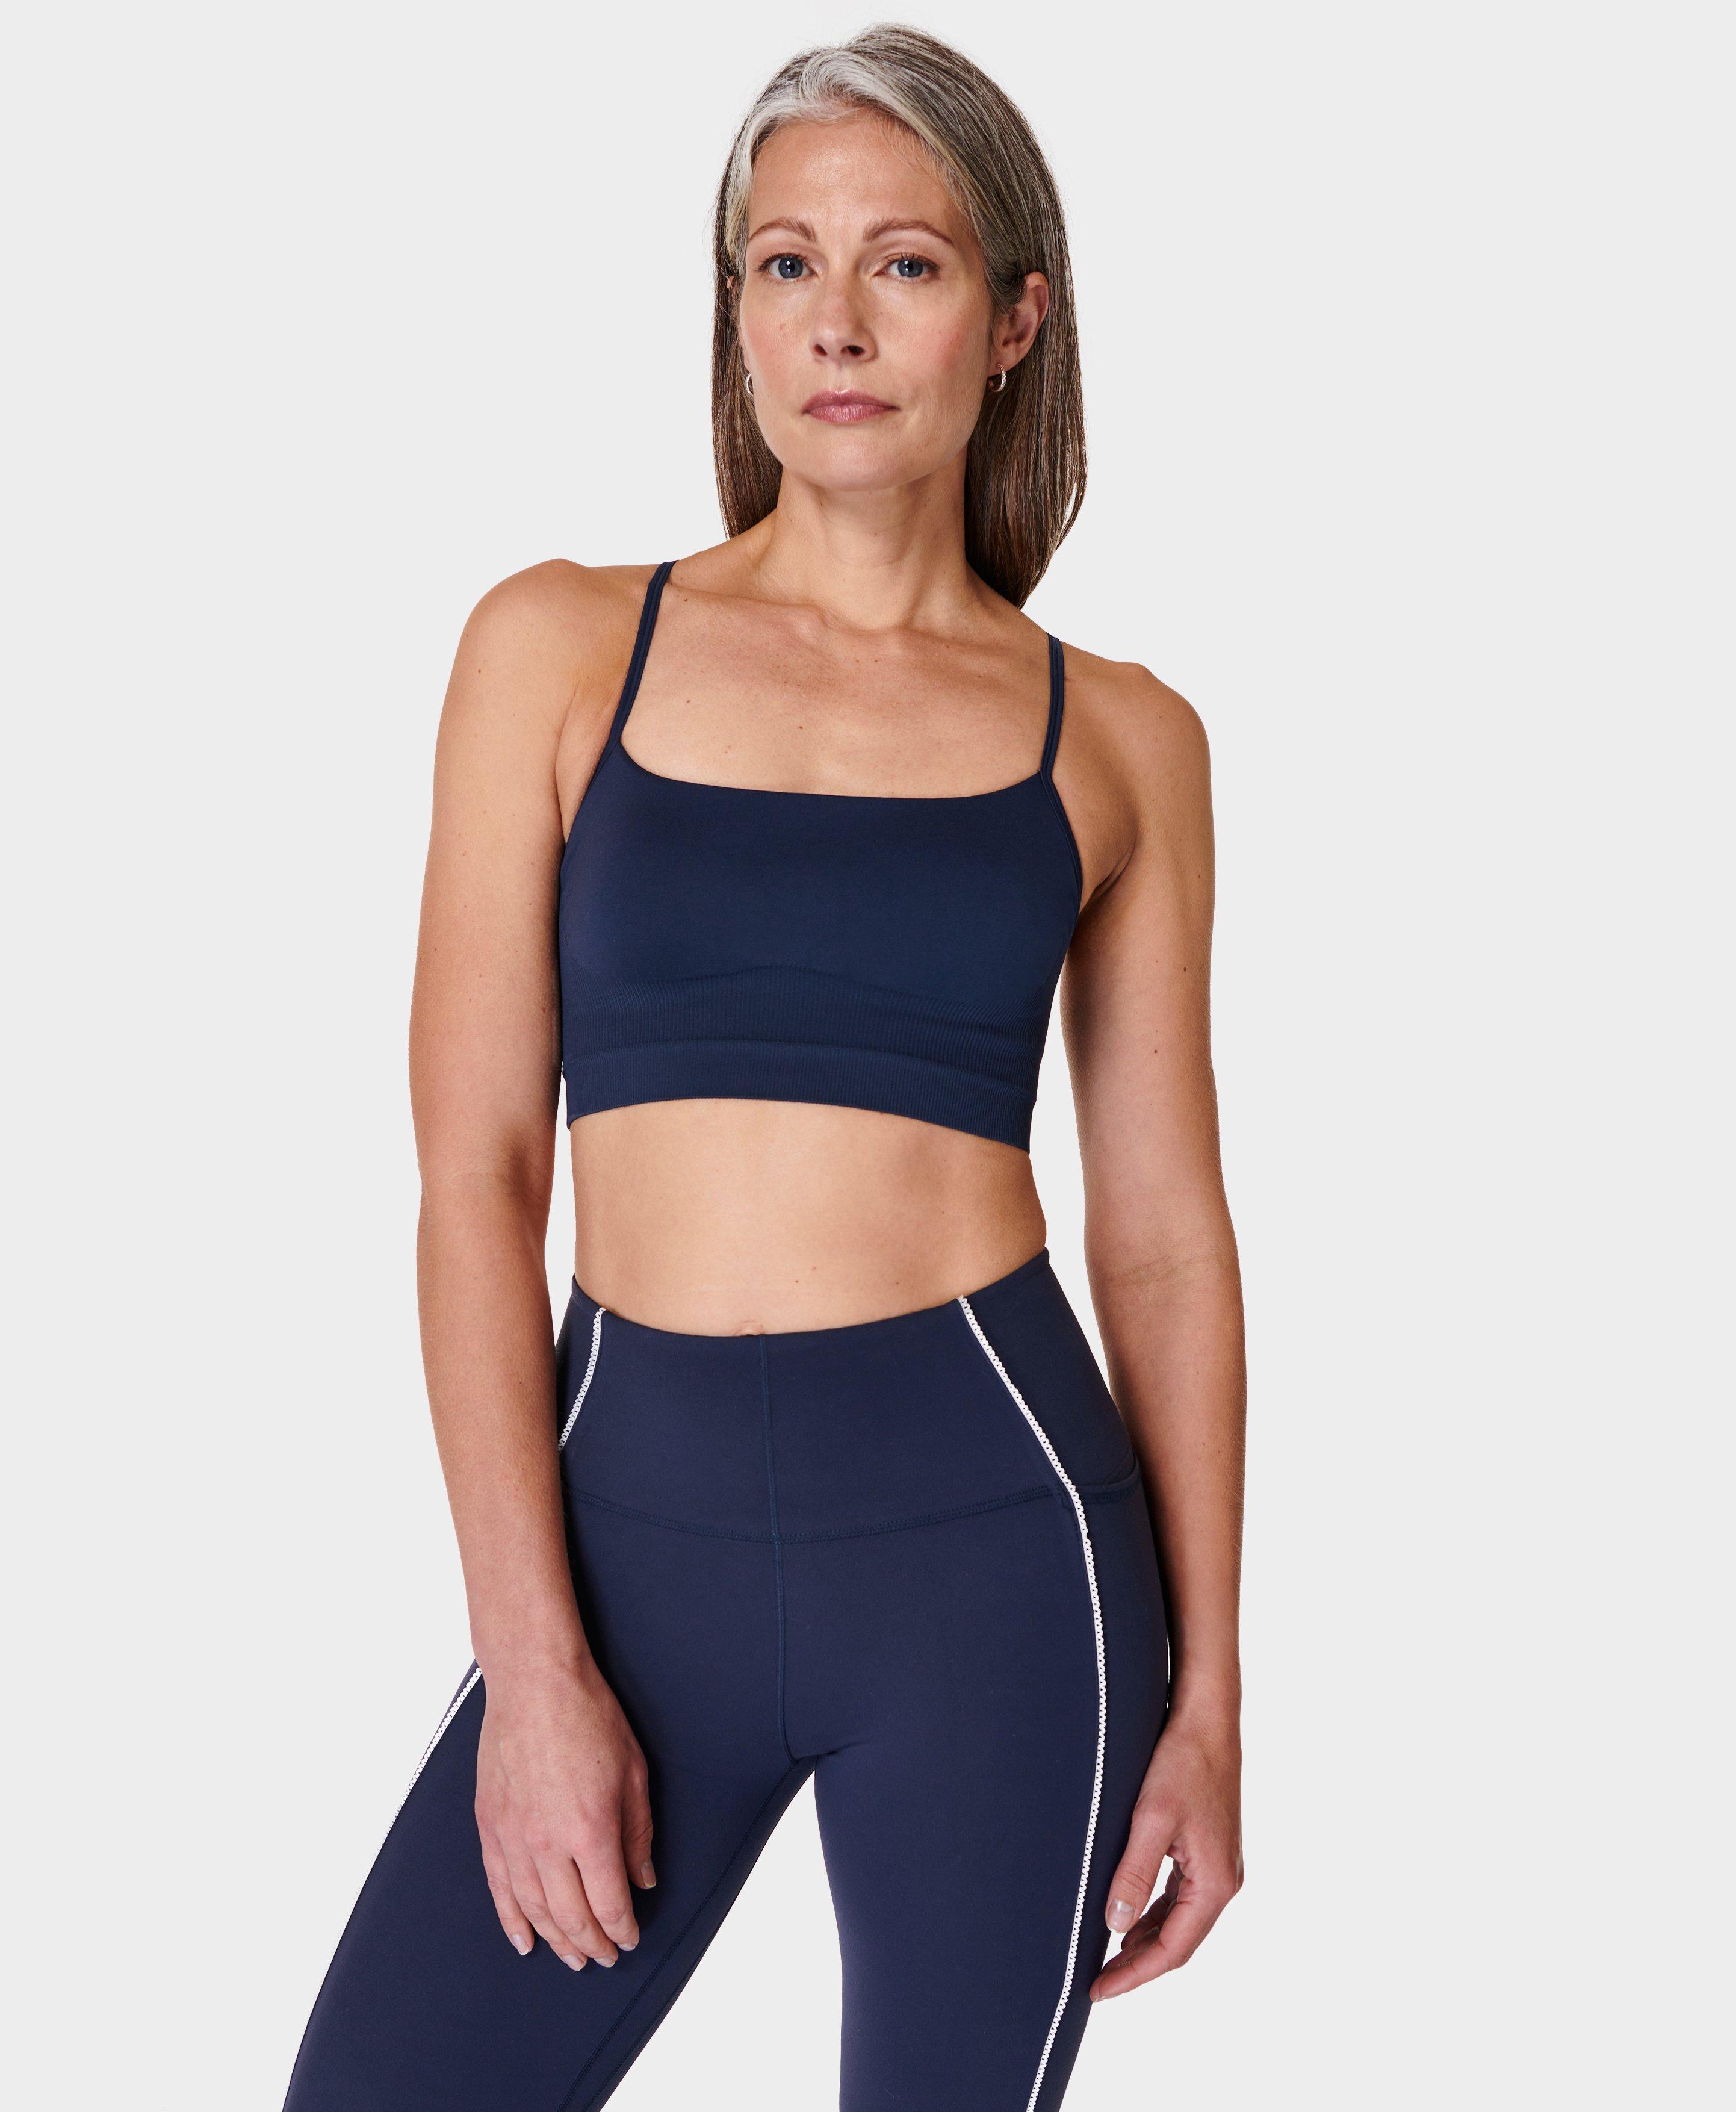 Old Navy Active Sports Bra Blue - $8 - From Sarah